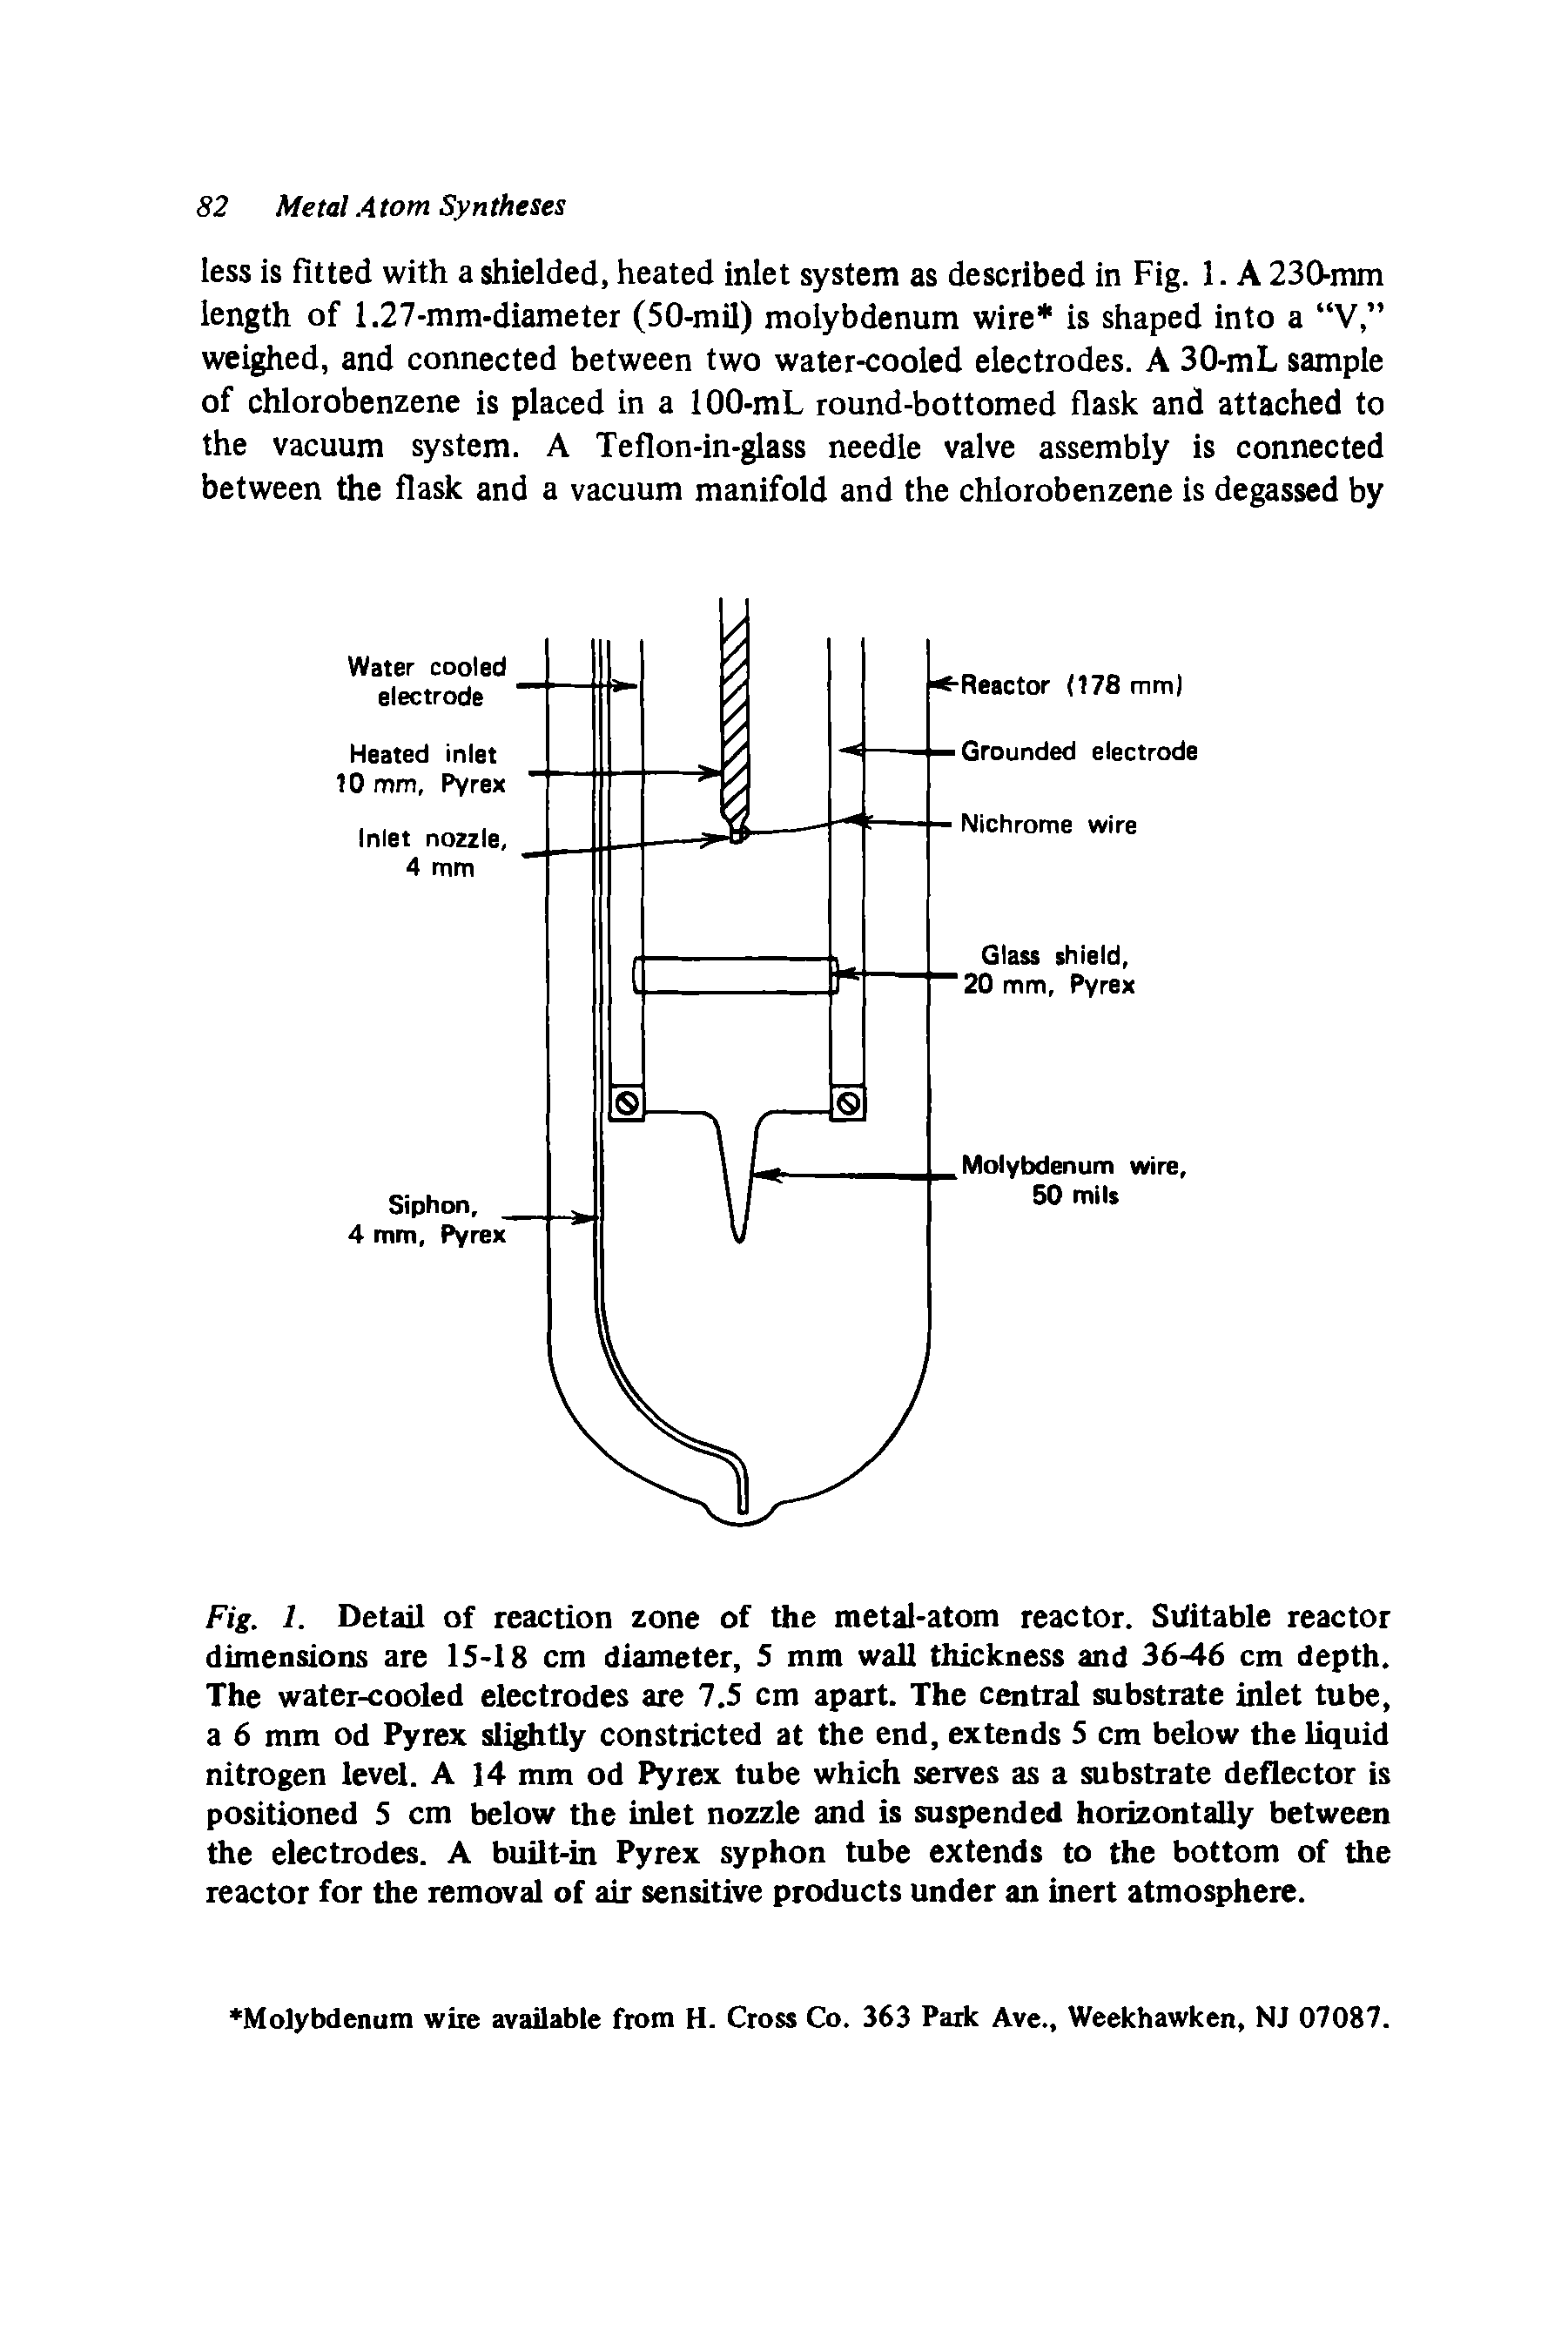 Fig. 1. Detail of reaction zone of the metal-atom reactor. Suitable reactor dimensions are 15-18 cm diameter, 5 mm wall thickness and 36-46 cm depth. The water-cooled electrodes are 7.5 cm apart. The central substrate inlet tube, a 6 mm od Pyrex slightly constricted at the end, extends 5 cm below the liquid nitrogen level. A 14 mm od Pyrex tube which serves as a substrate deflector is positioned 5 cm below the inlet nozzle and is suspended horizontally between the electrodes. A built-in Pyrex syphon tube extends to the bottom of the reactor for the removal of air sensitive products under an inert atmosphere.